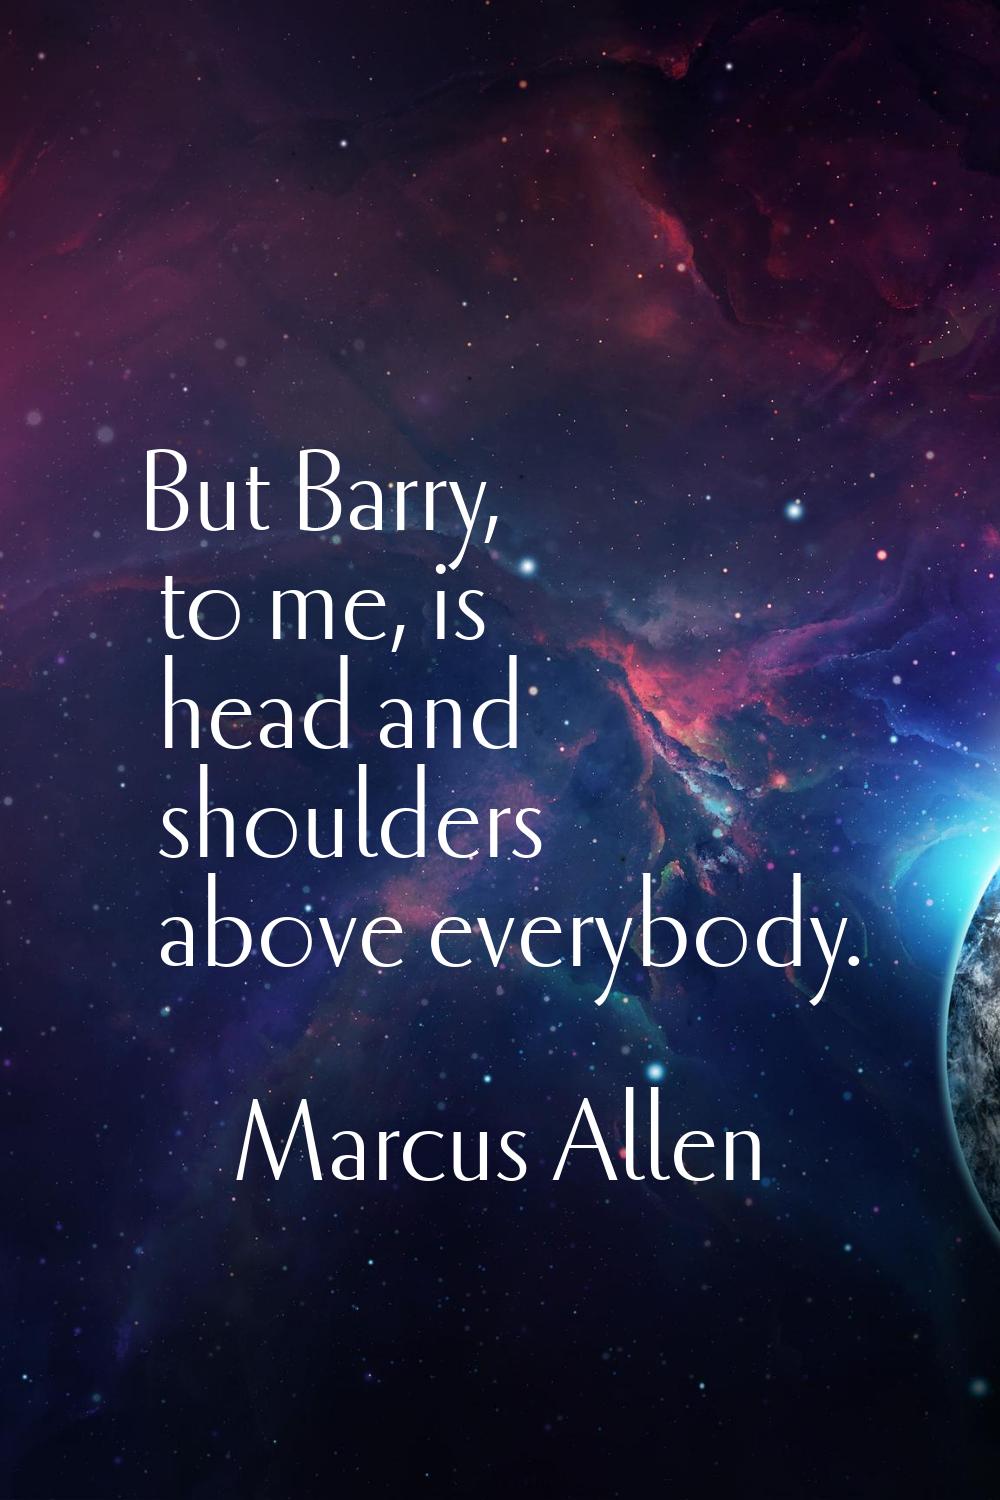 But Barry, to me, is head and shoulders above everybody.